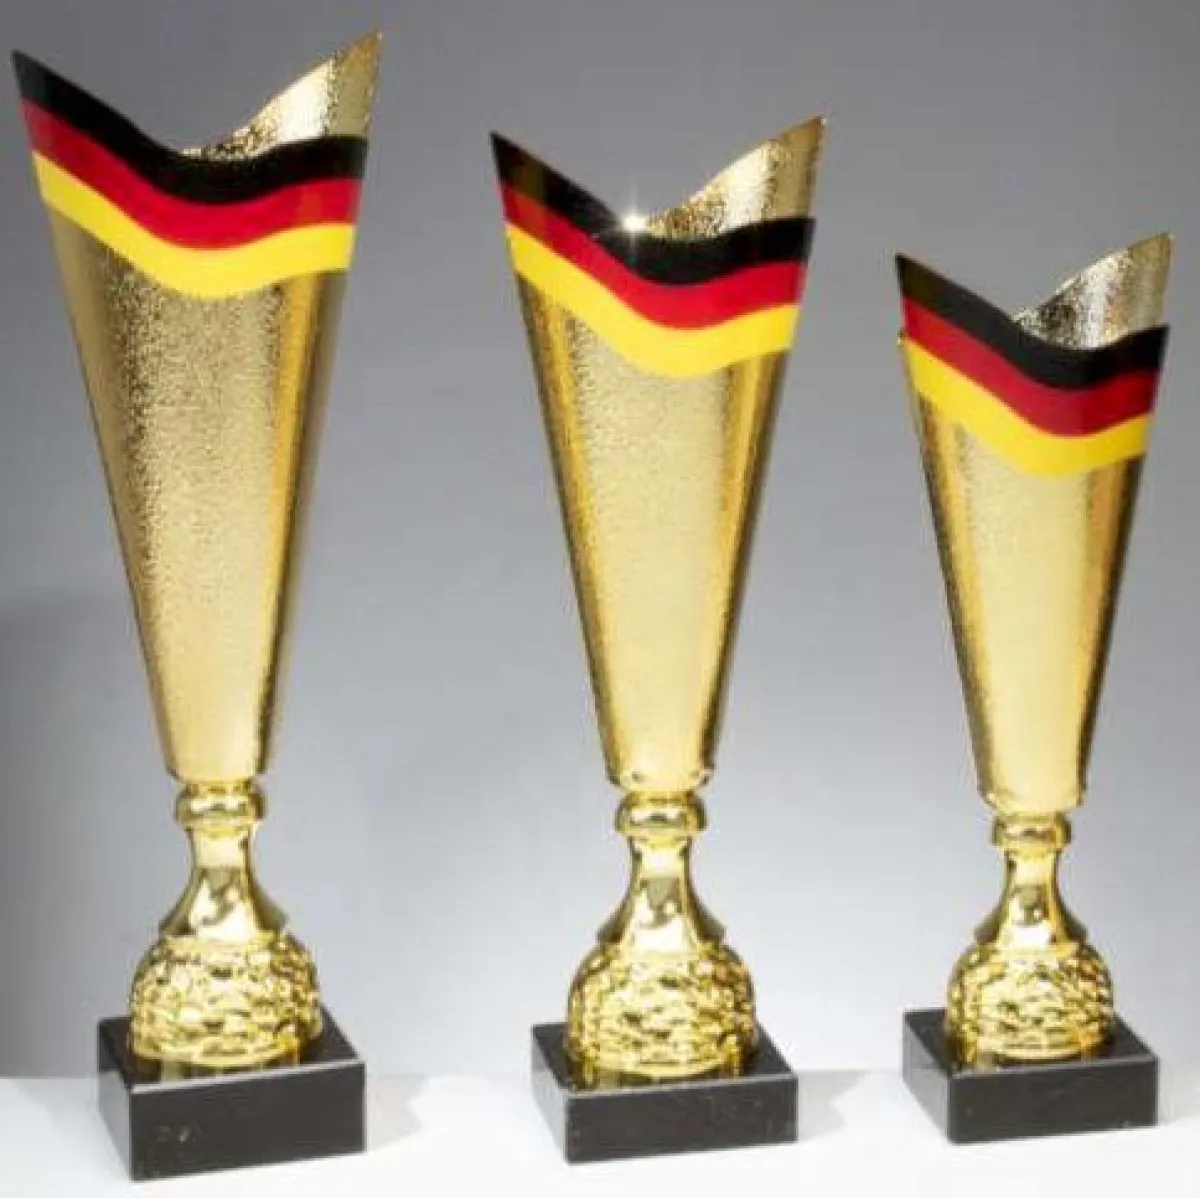 Germany Cup | Cup National Germany Flag gold